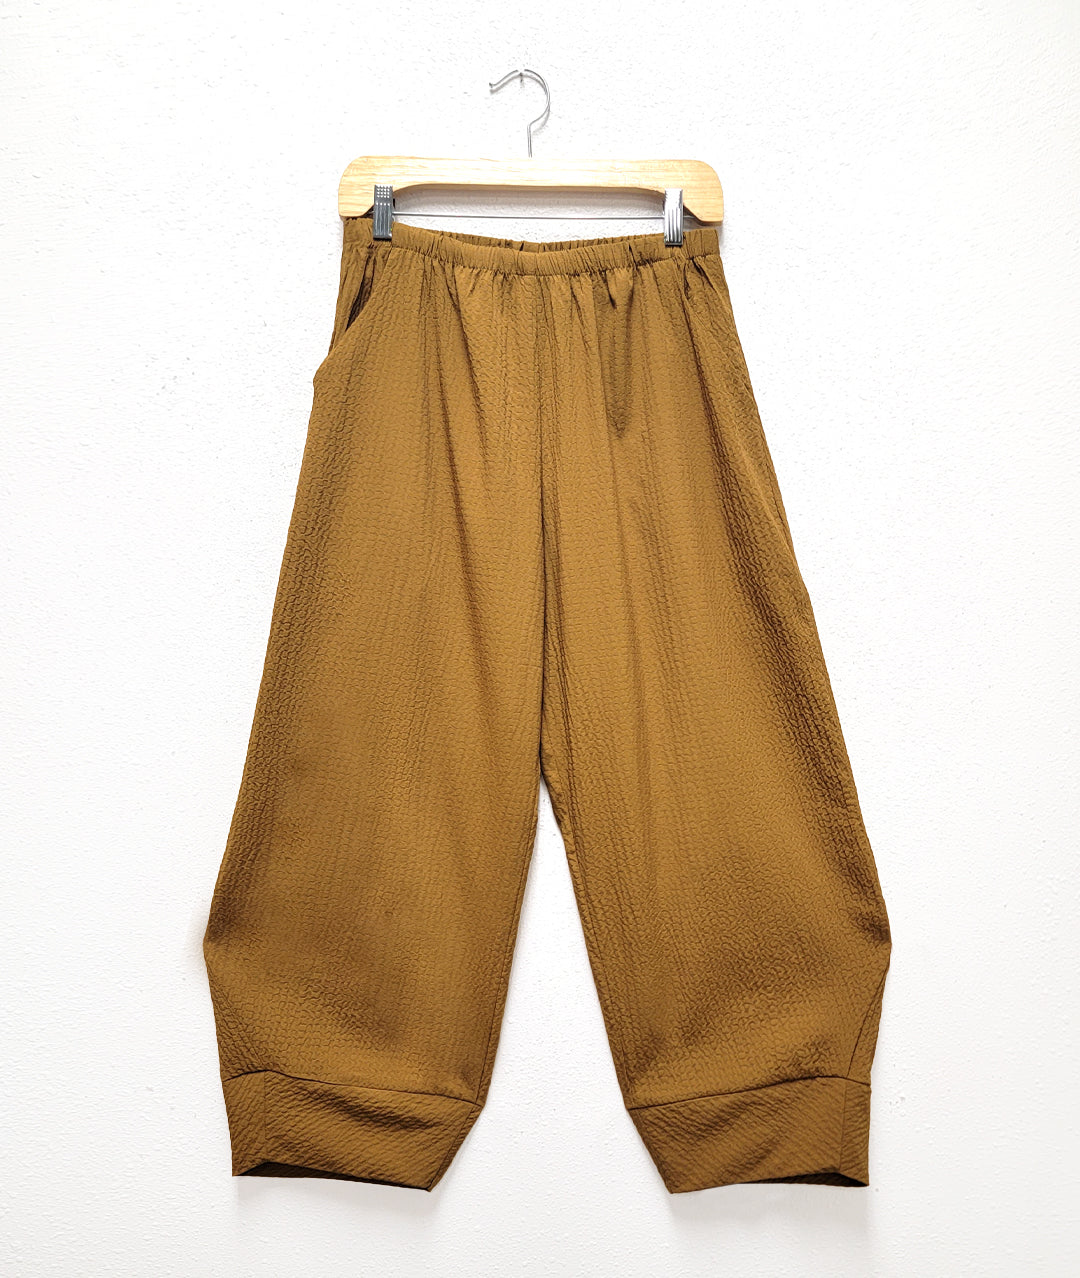 dijon yellow textured pant with pockets, an elastic waistband, and a tapered cuff at the bottom hem